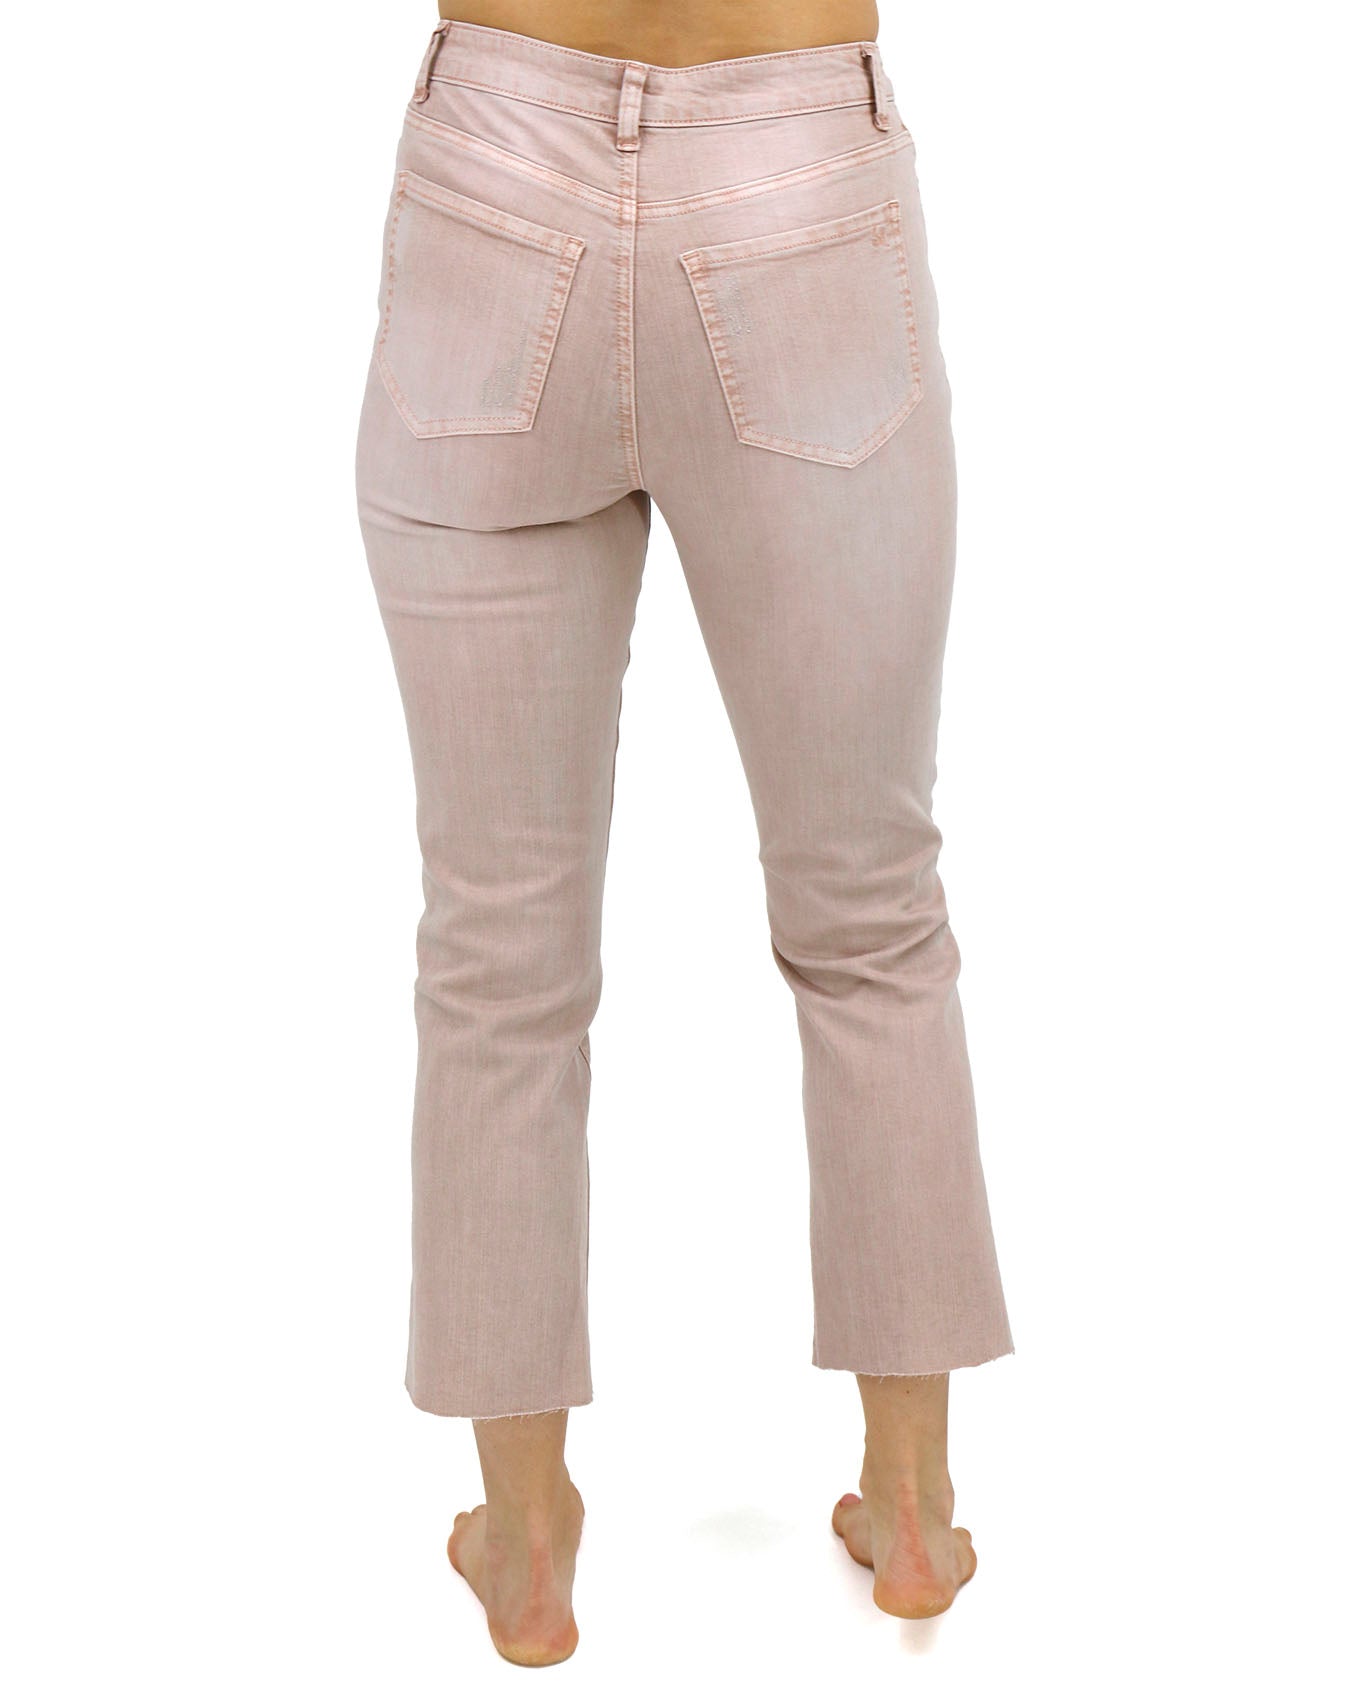 Back stock shot of Blush Mel’s Fave Distressed Cropped Straight Leg Colored Denim